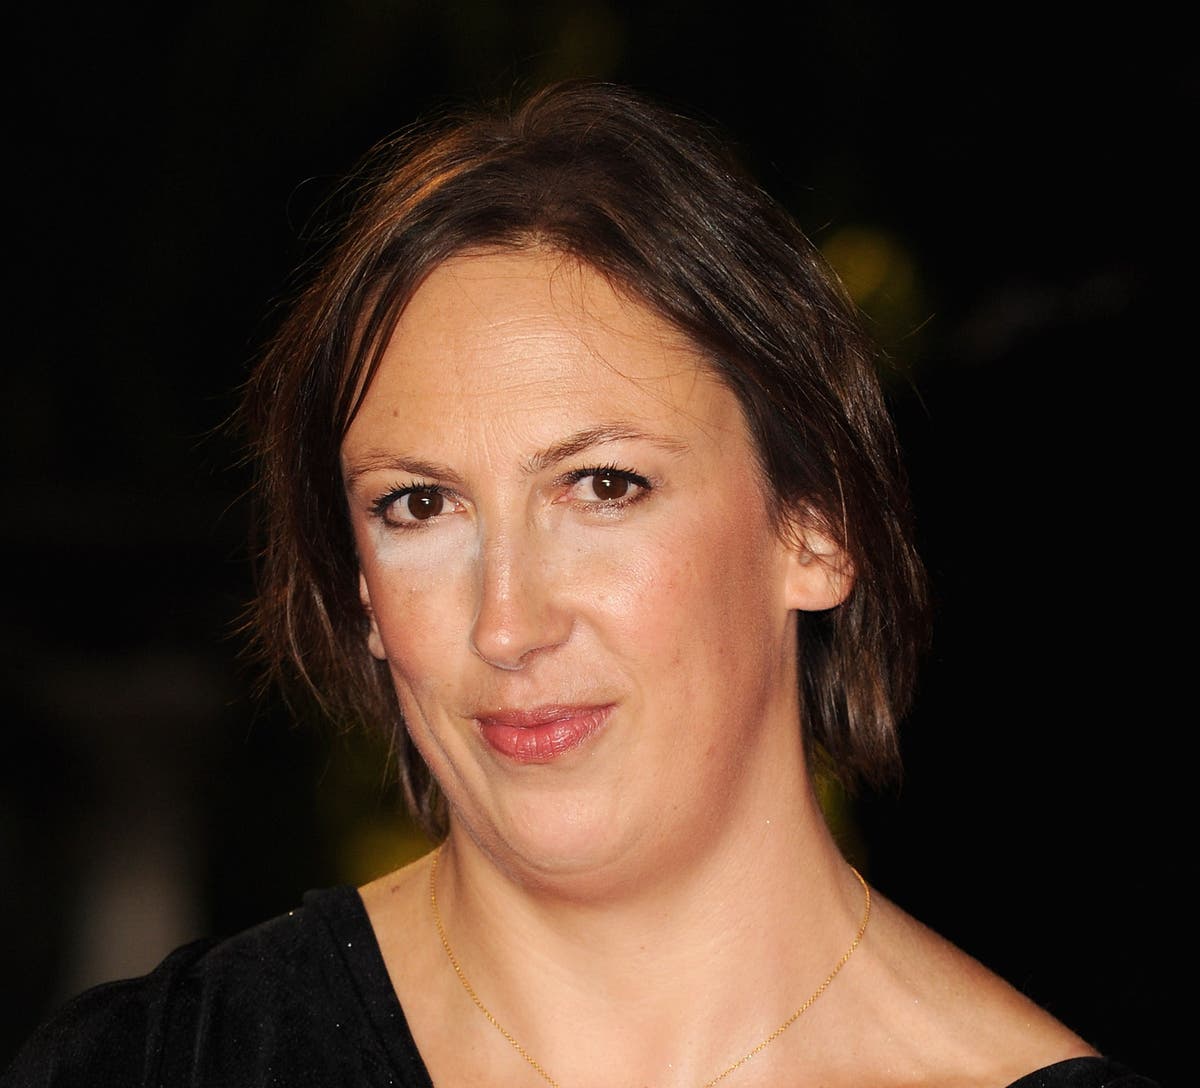 Miranda Hart opens up about Twitter abuse she faces